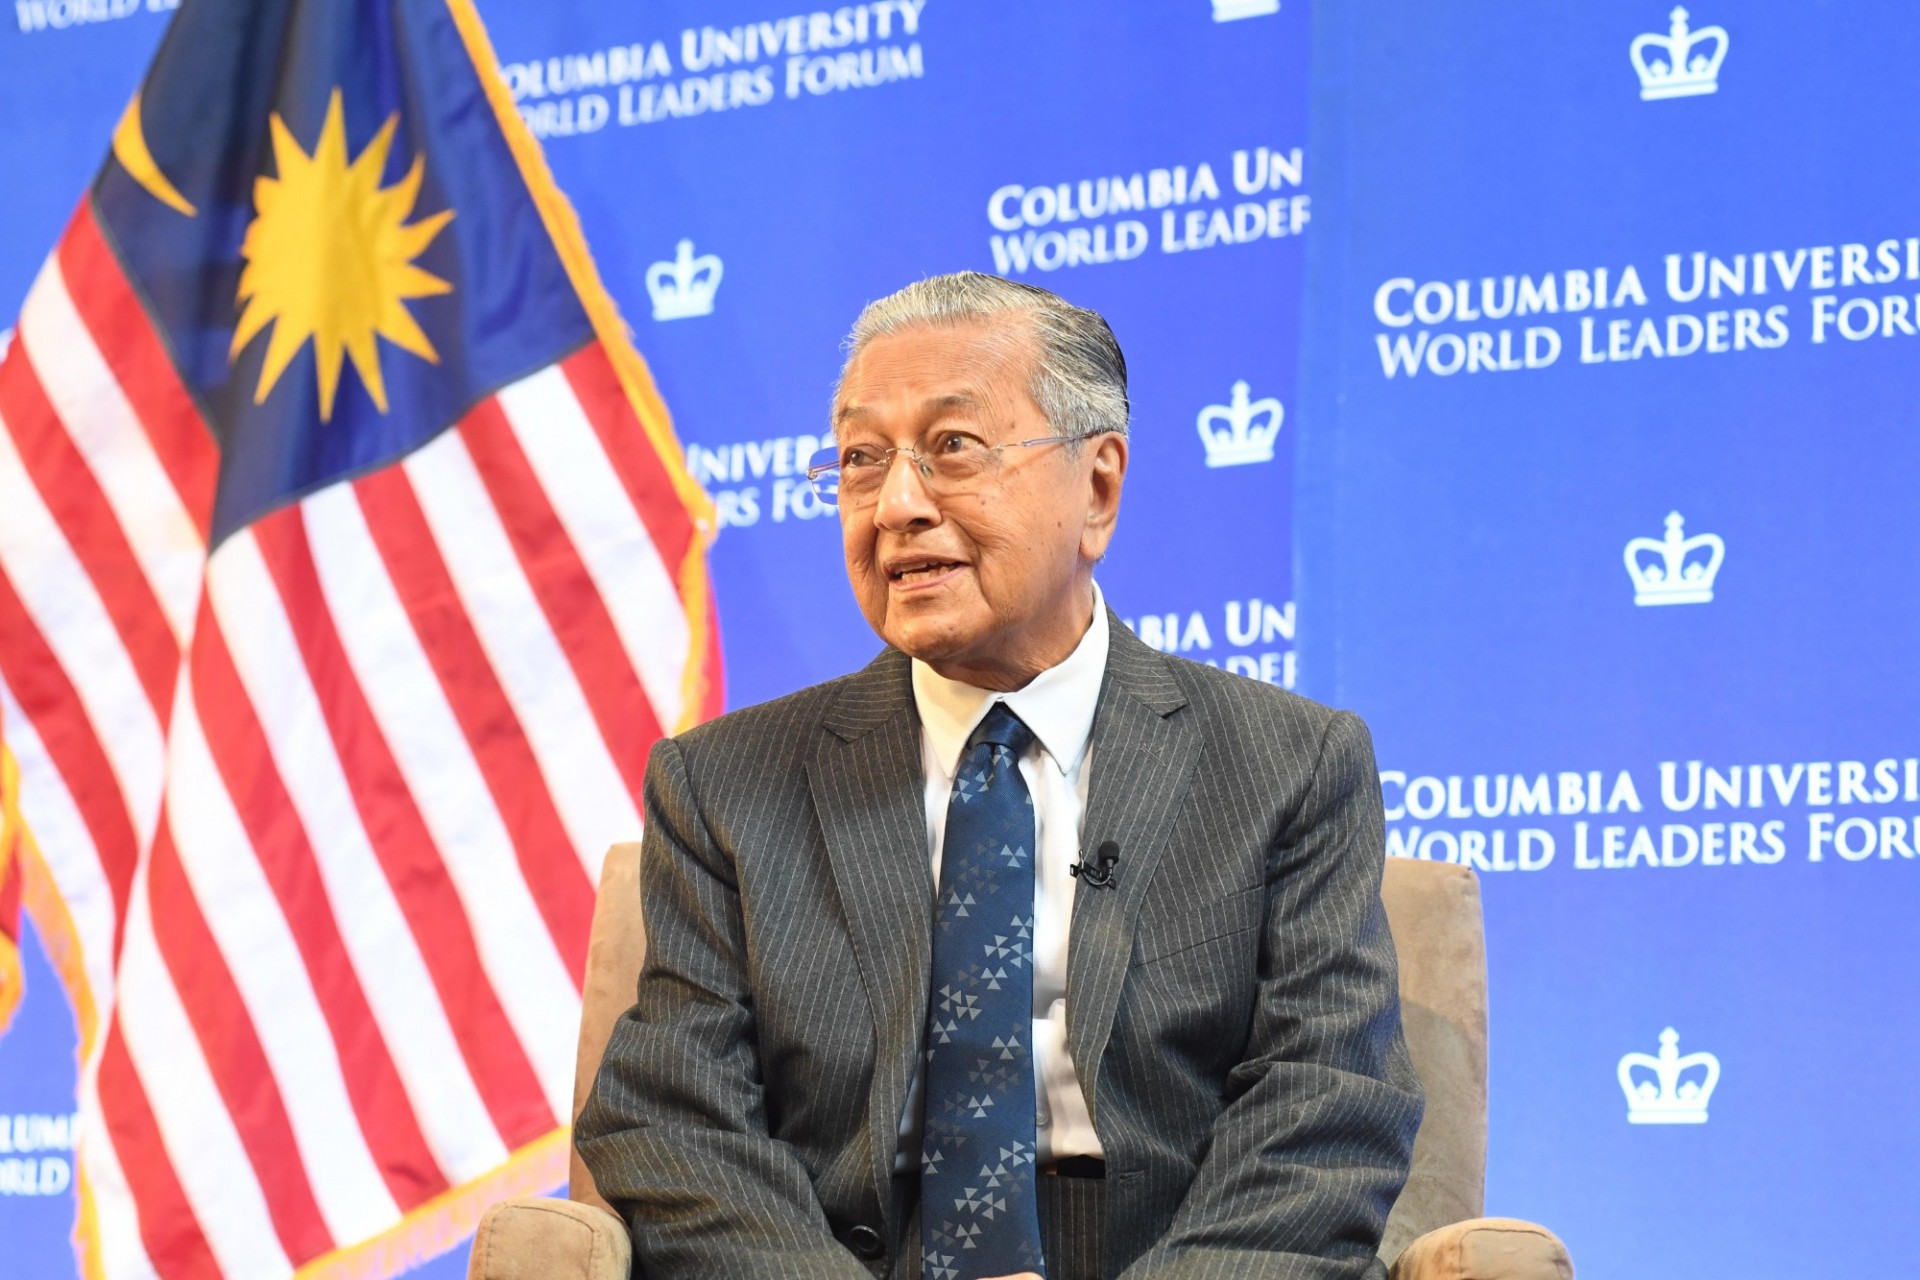 Prime Minister Mahathir Mohamad of Malaysia delivers his address to Columbia University students, faculty and staff.